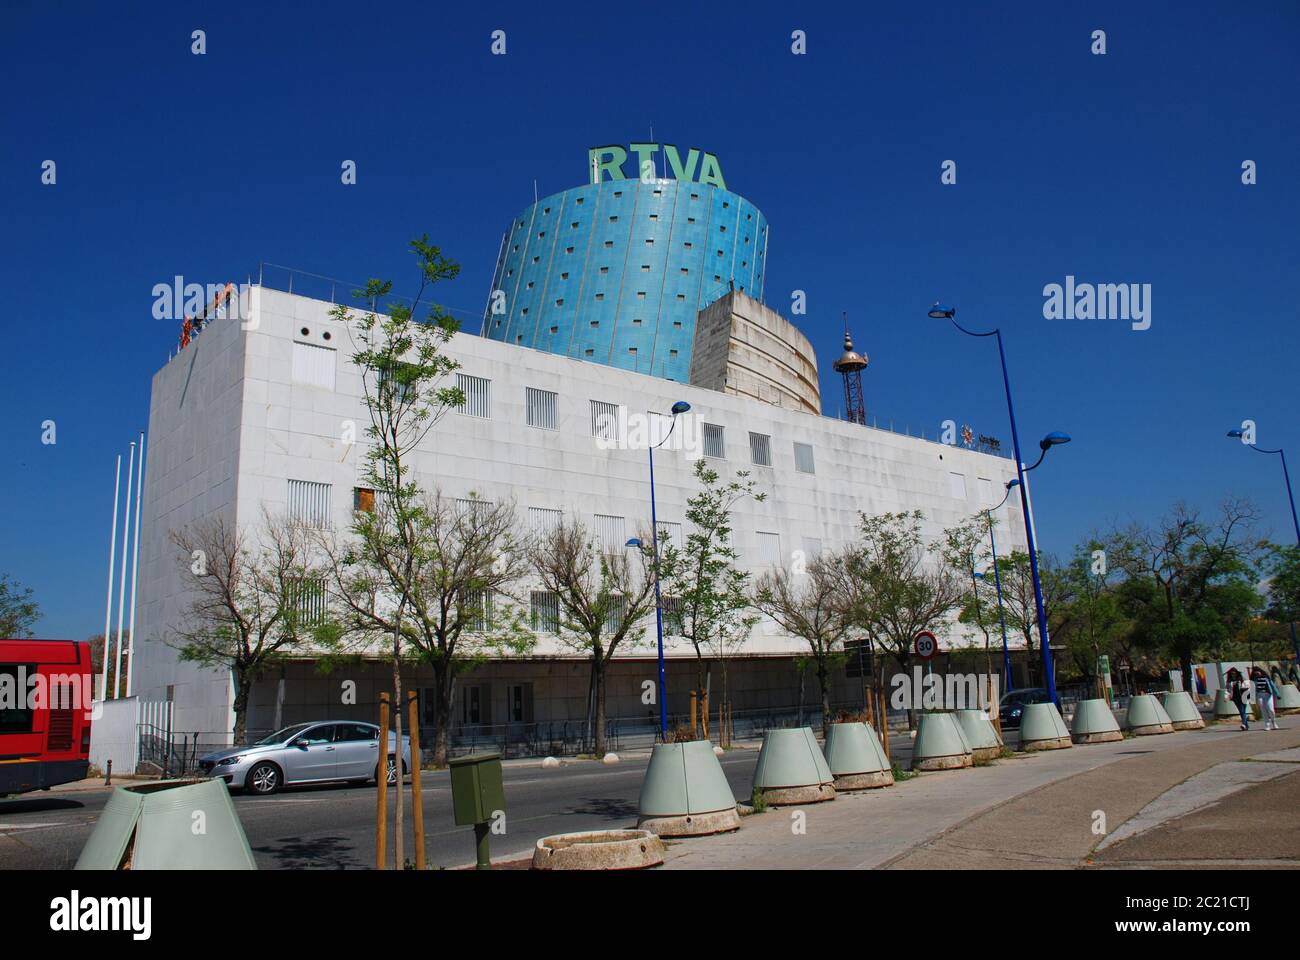 The RTVA (Radio and Television of Andalucia) studios on the Isla Cartuja in Seville, Spain on April 3, 2019. Stock Photo